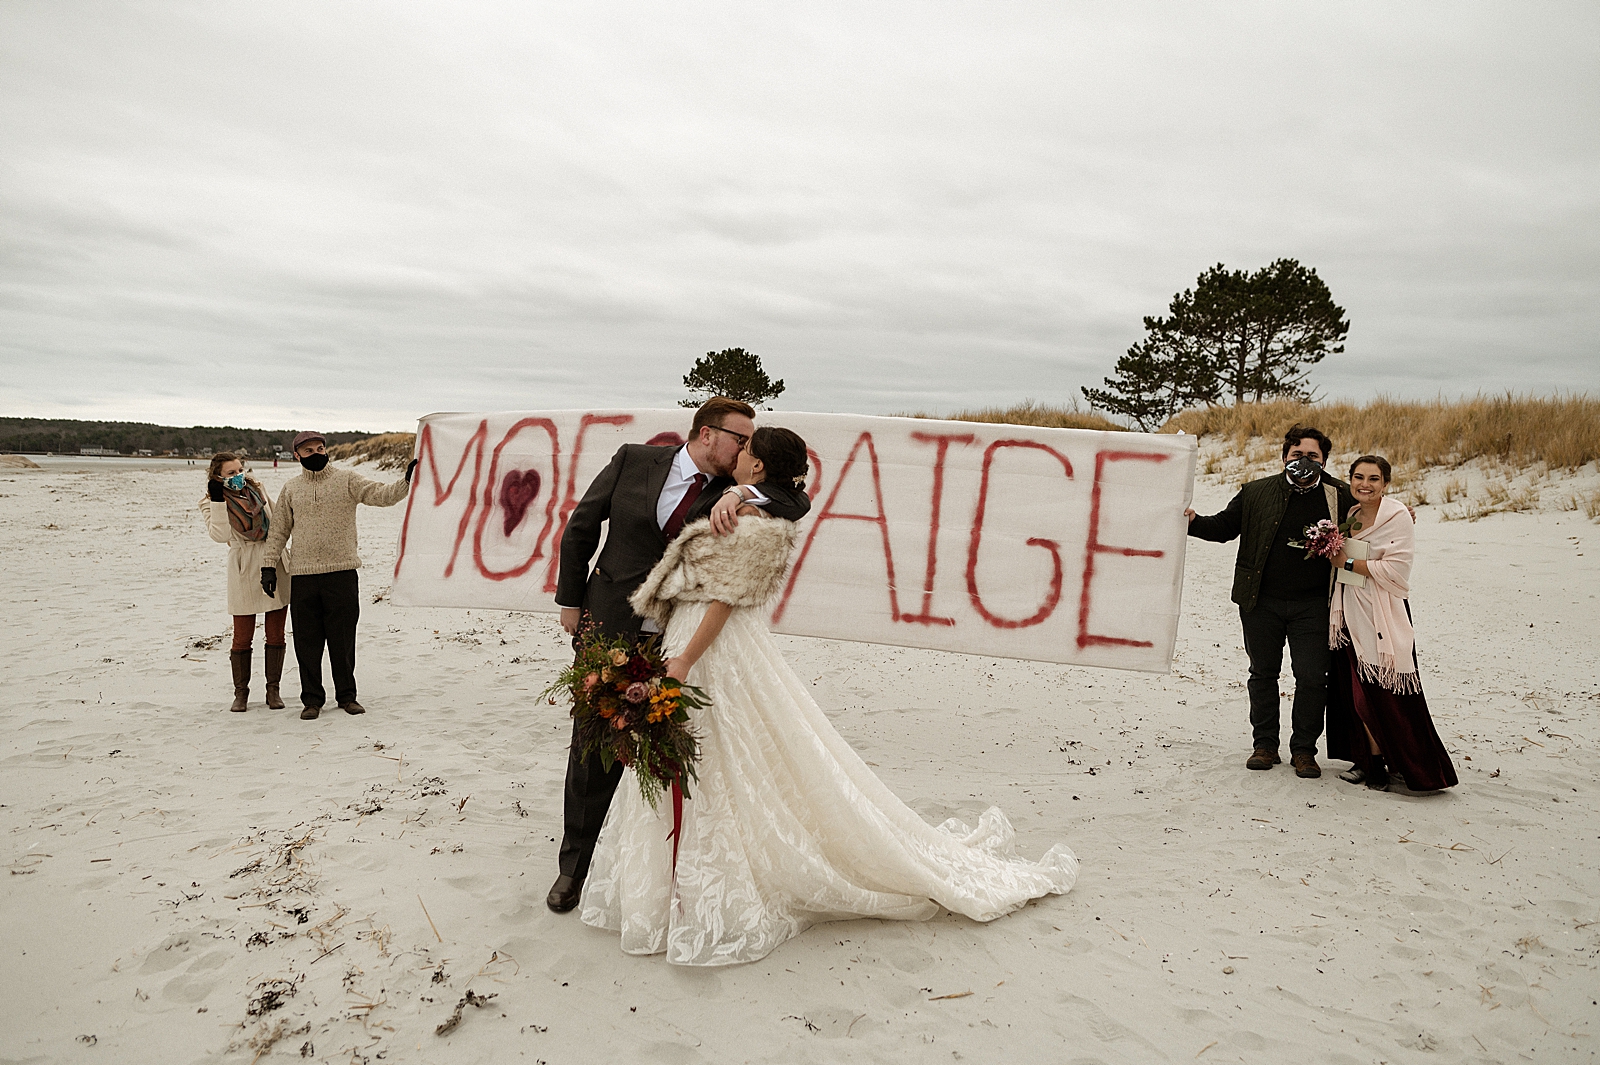 Bride and Groom kissing in front of Bride and Groom sign on the beach